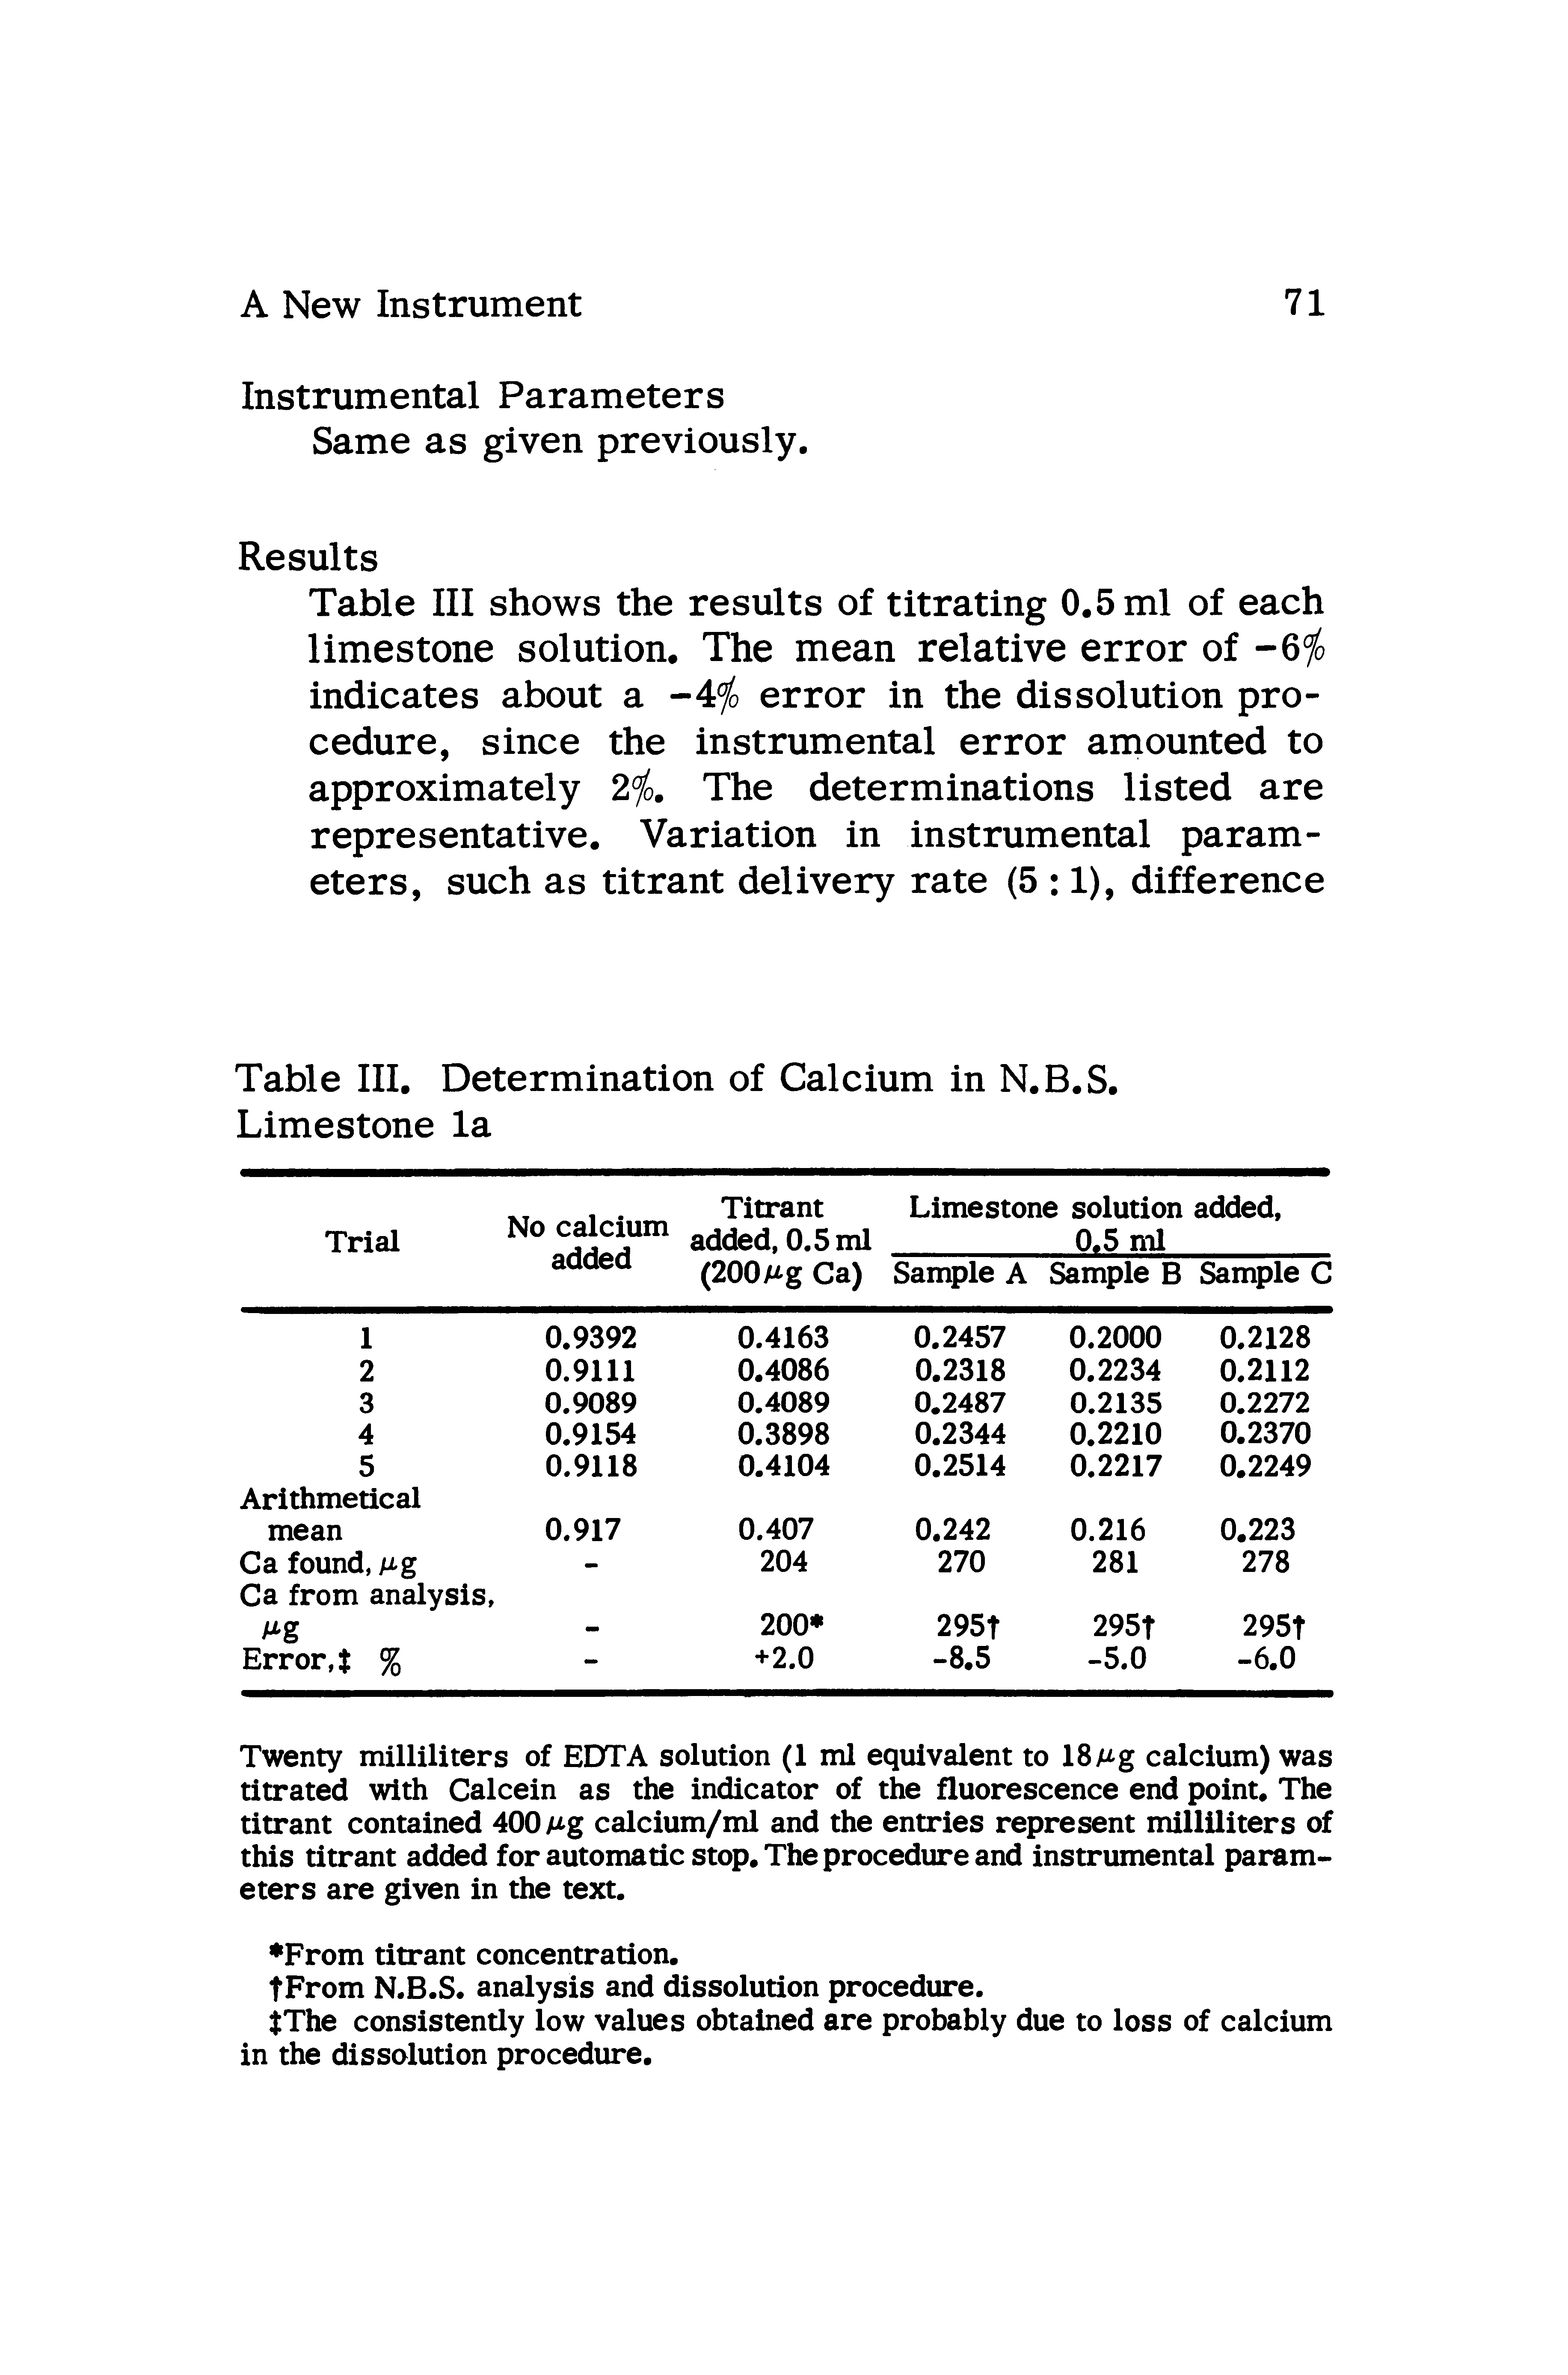 Table III shows the results of titrating 0.5 ml of each limestone solution. The mean relative error of -6 indicates about a -4 error in the dissolution procedure, since the instrumental error amounted to approximately 2% The determinations listed are representative. Variation in instrumental parameters, such as titrant delivery rate (5 1), difference...